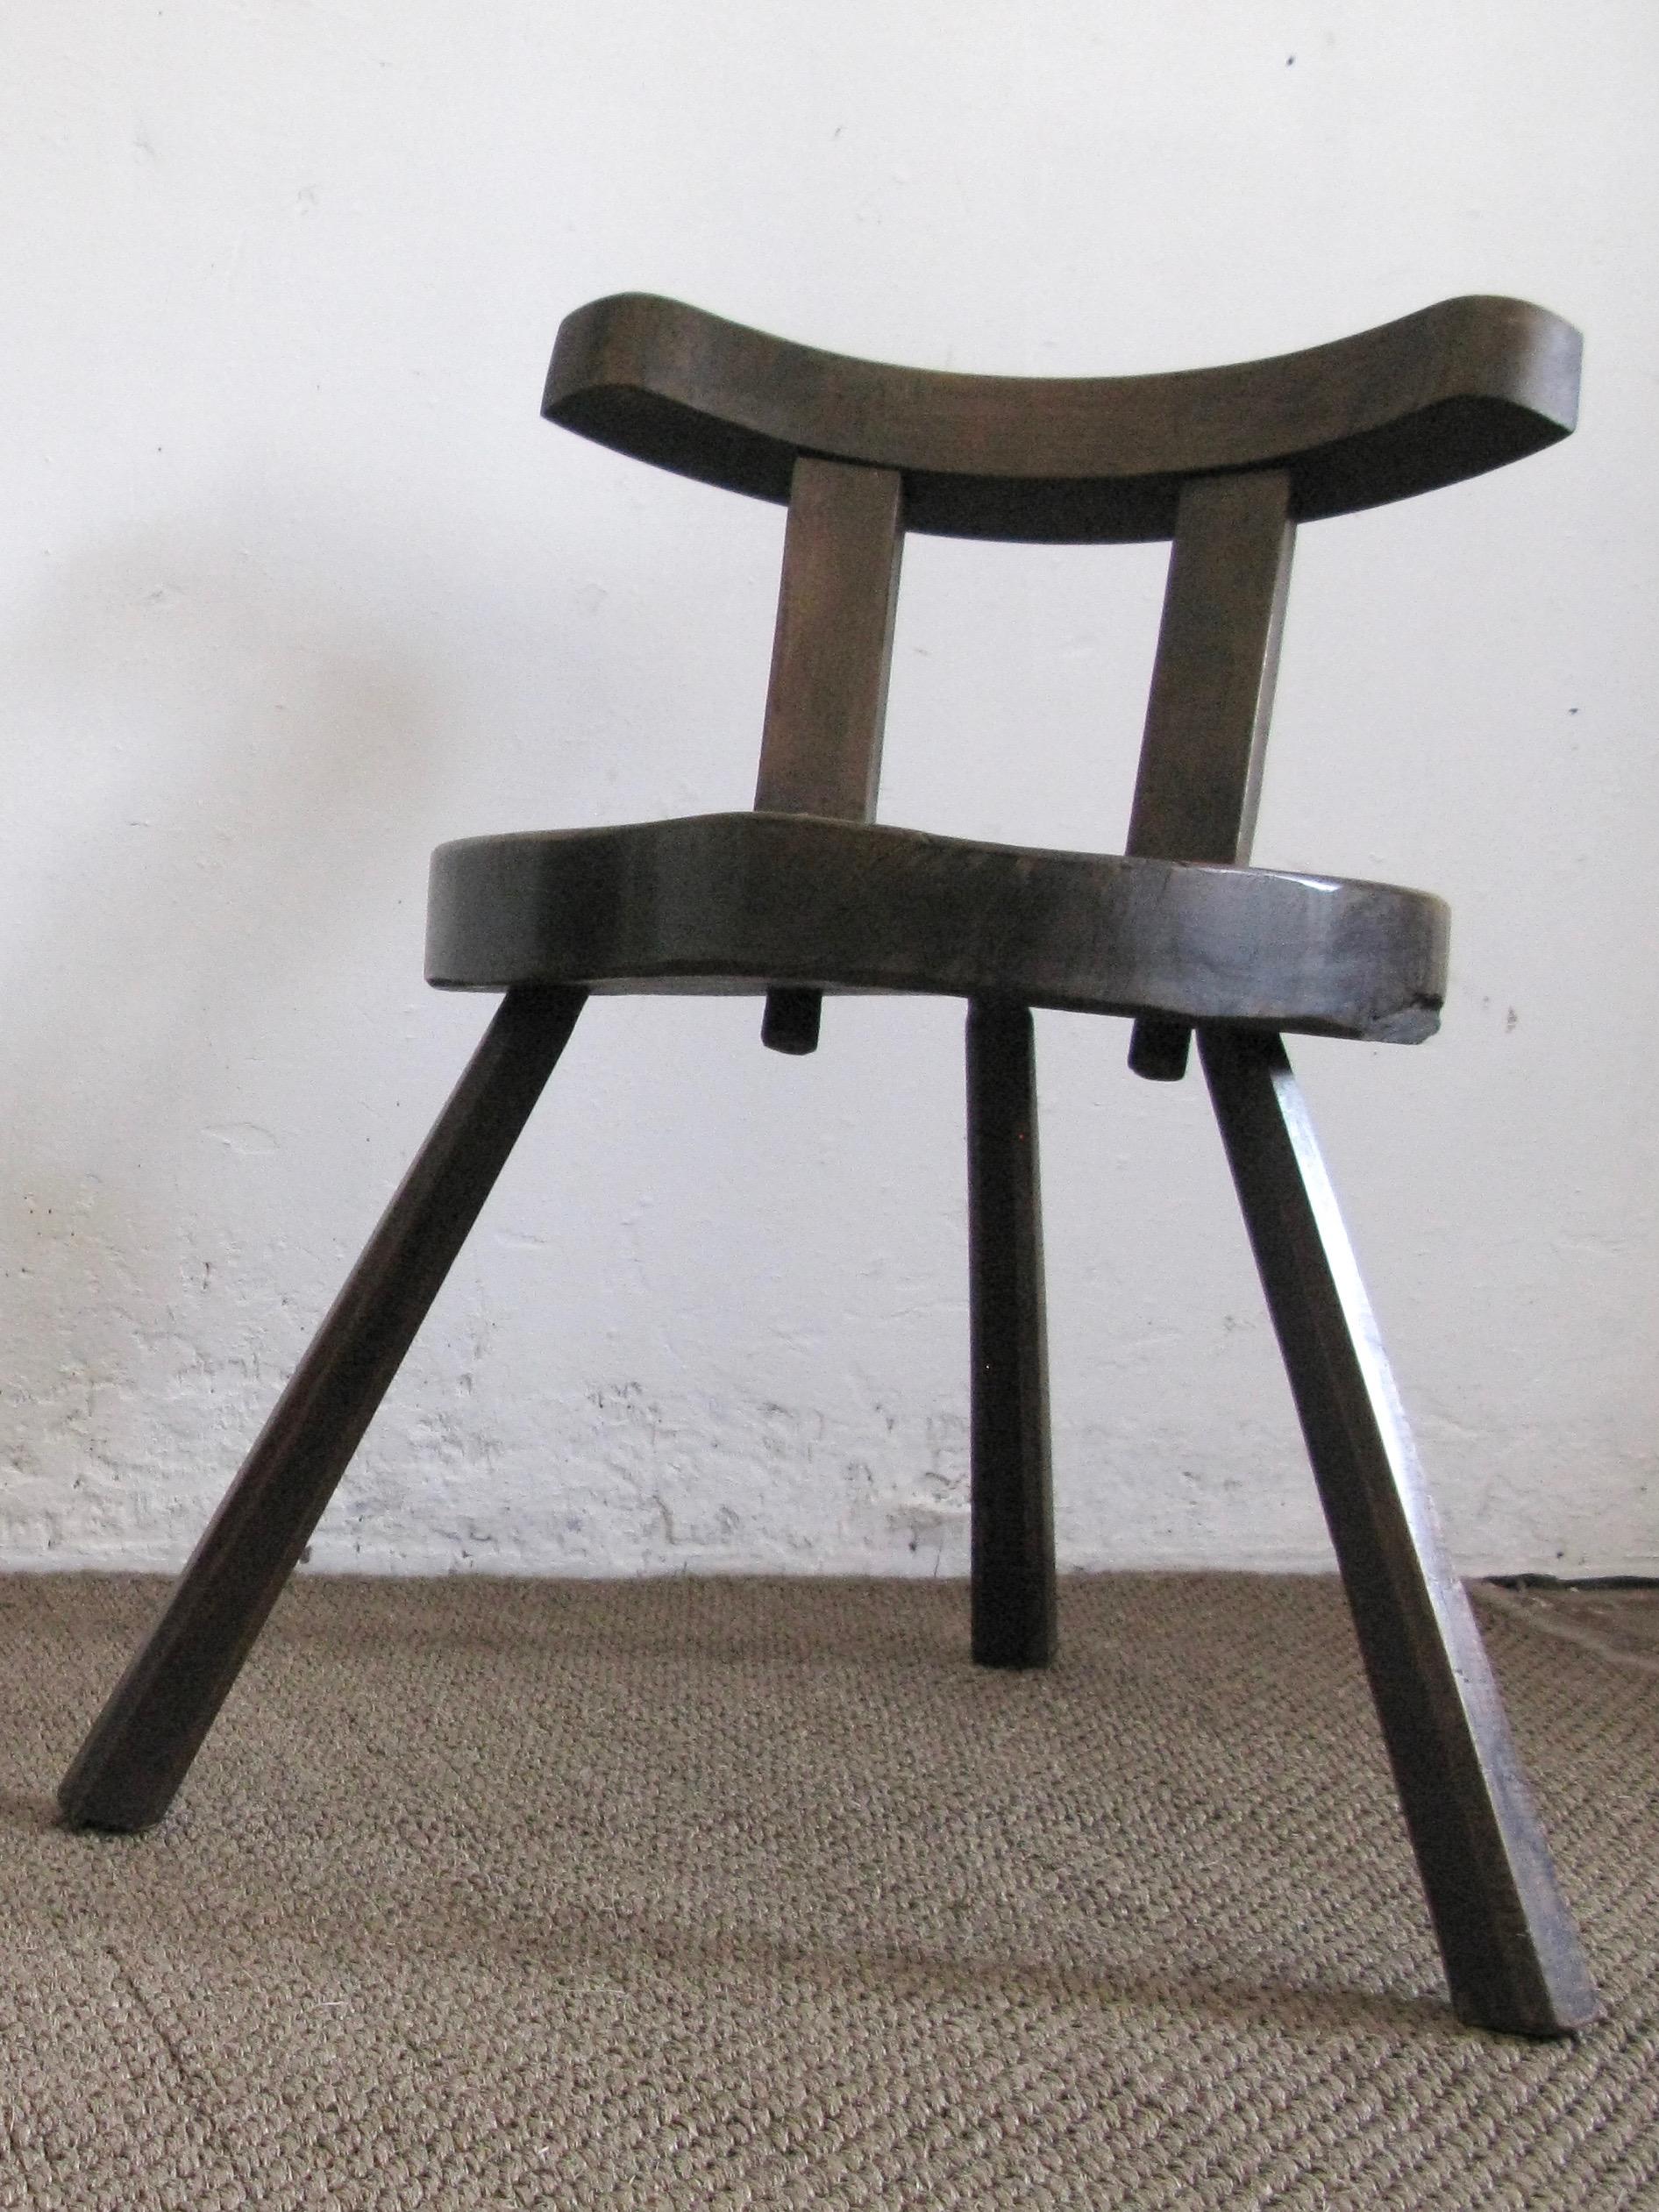 Primitive rustic chair, working chair, wood, country style, origin England.

Lovely to complement in a sitting room close to a fire place, or in a hall

Beautiful  modern design
very  comfortable.

Word from the owner
During these uncertain times,